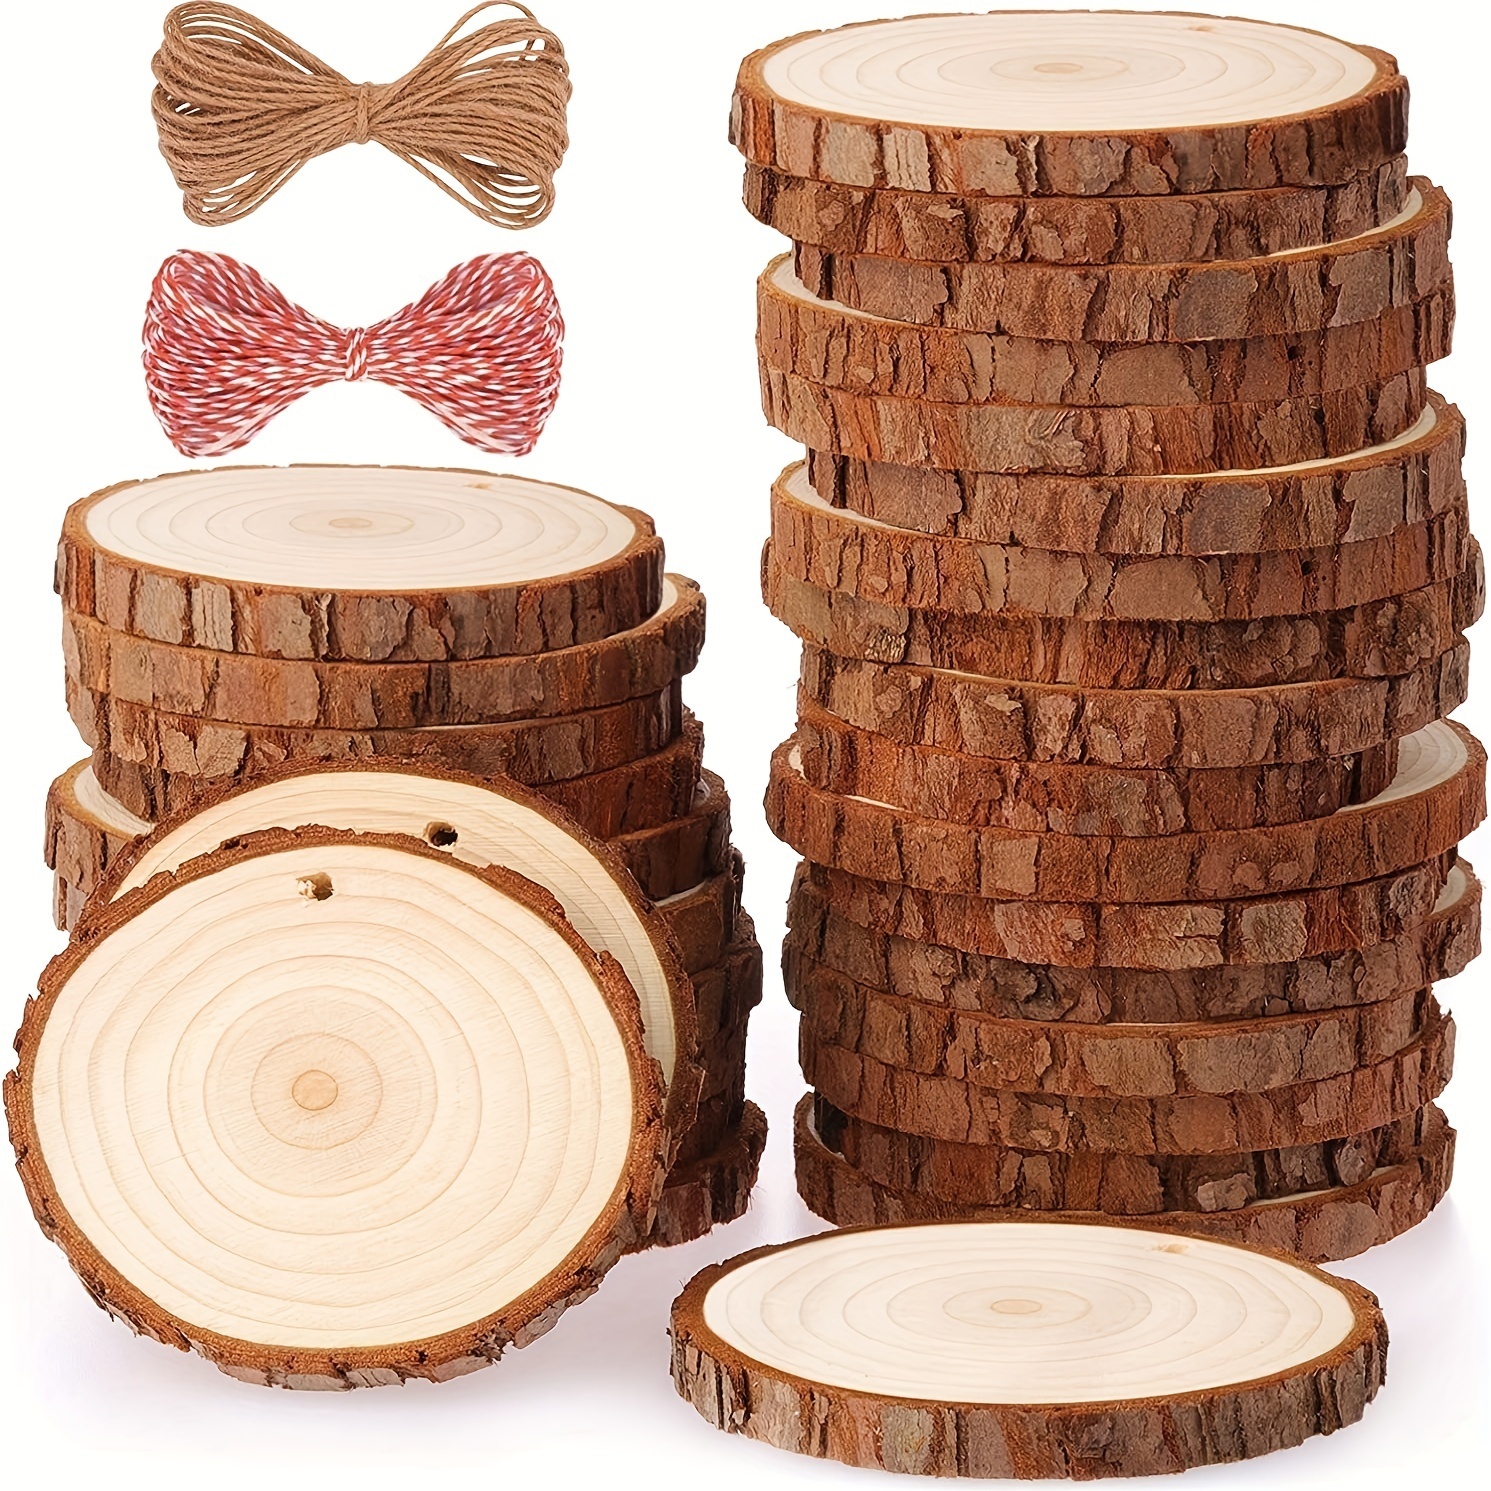 30pcs Round Wooden Discs With Holes, 3 Unfinished Predrilled